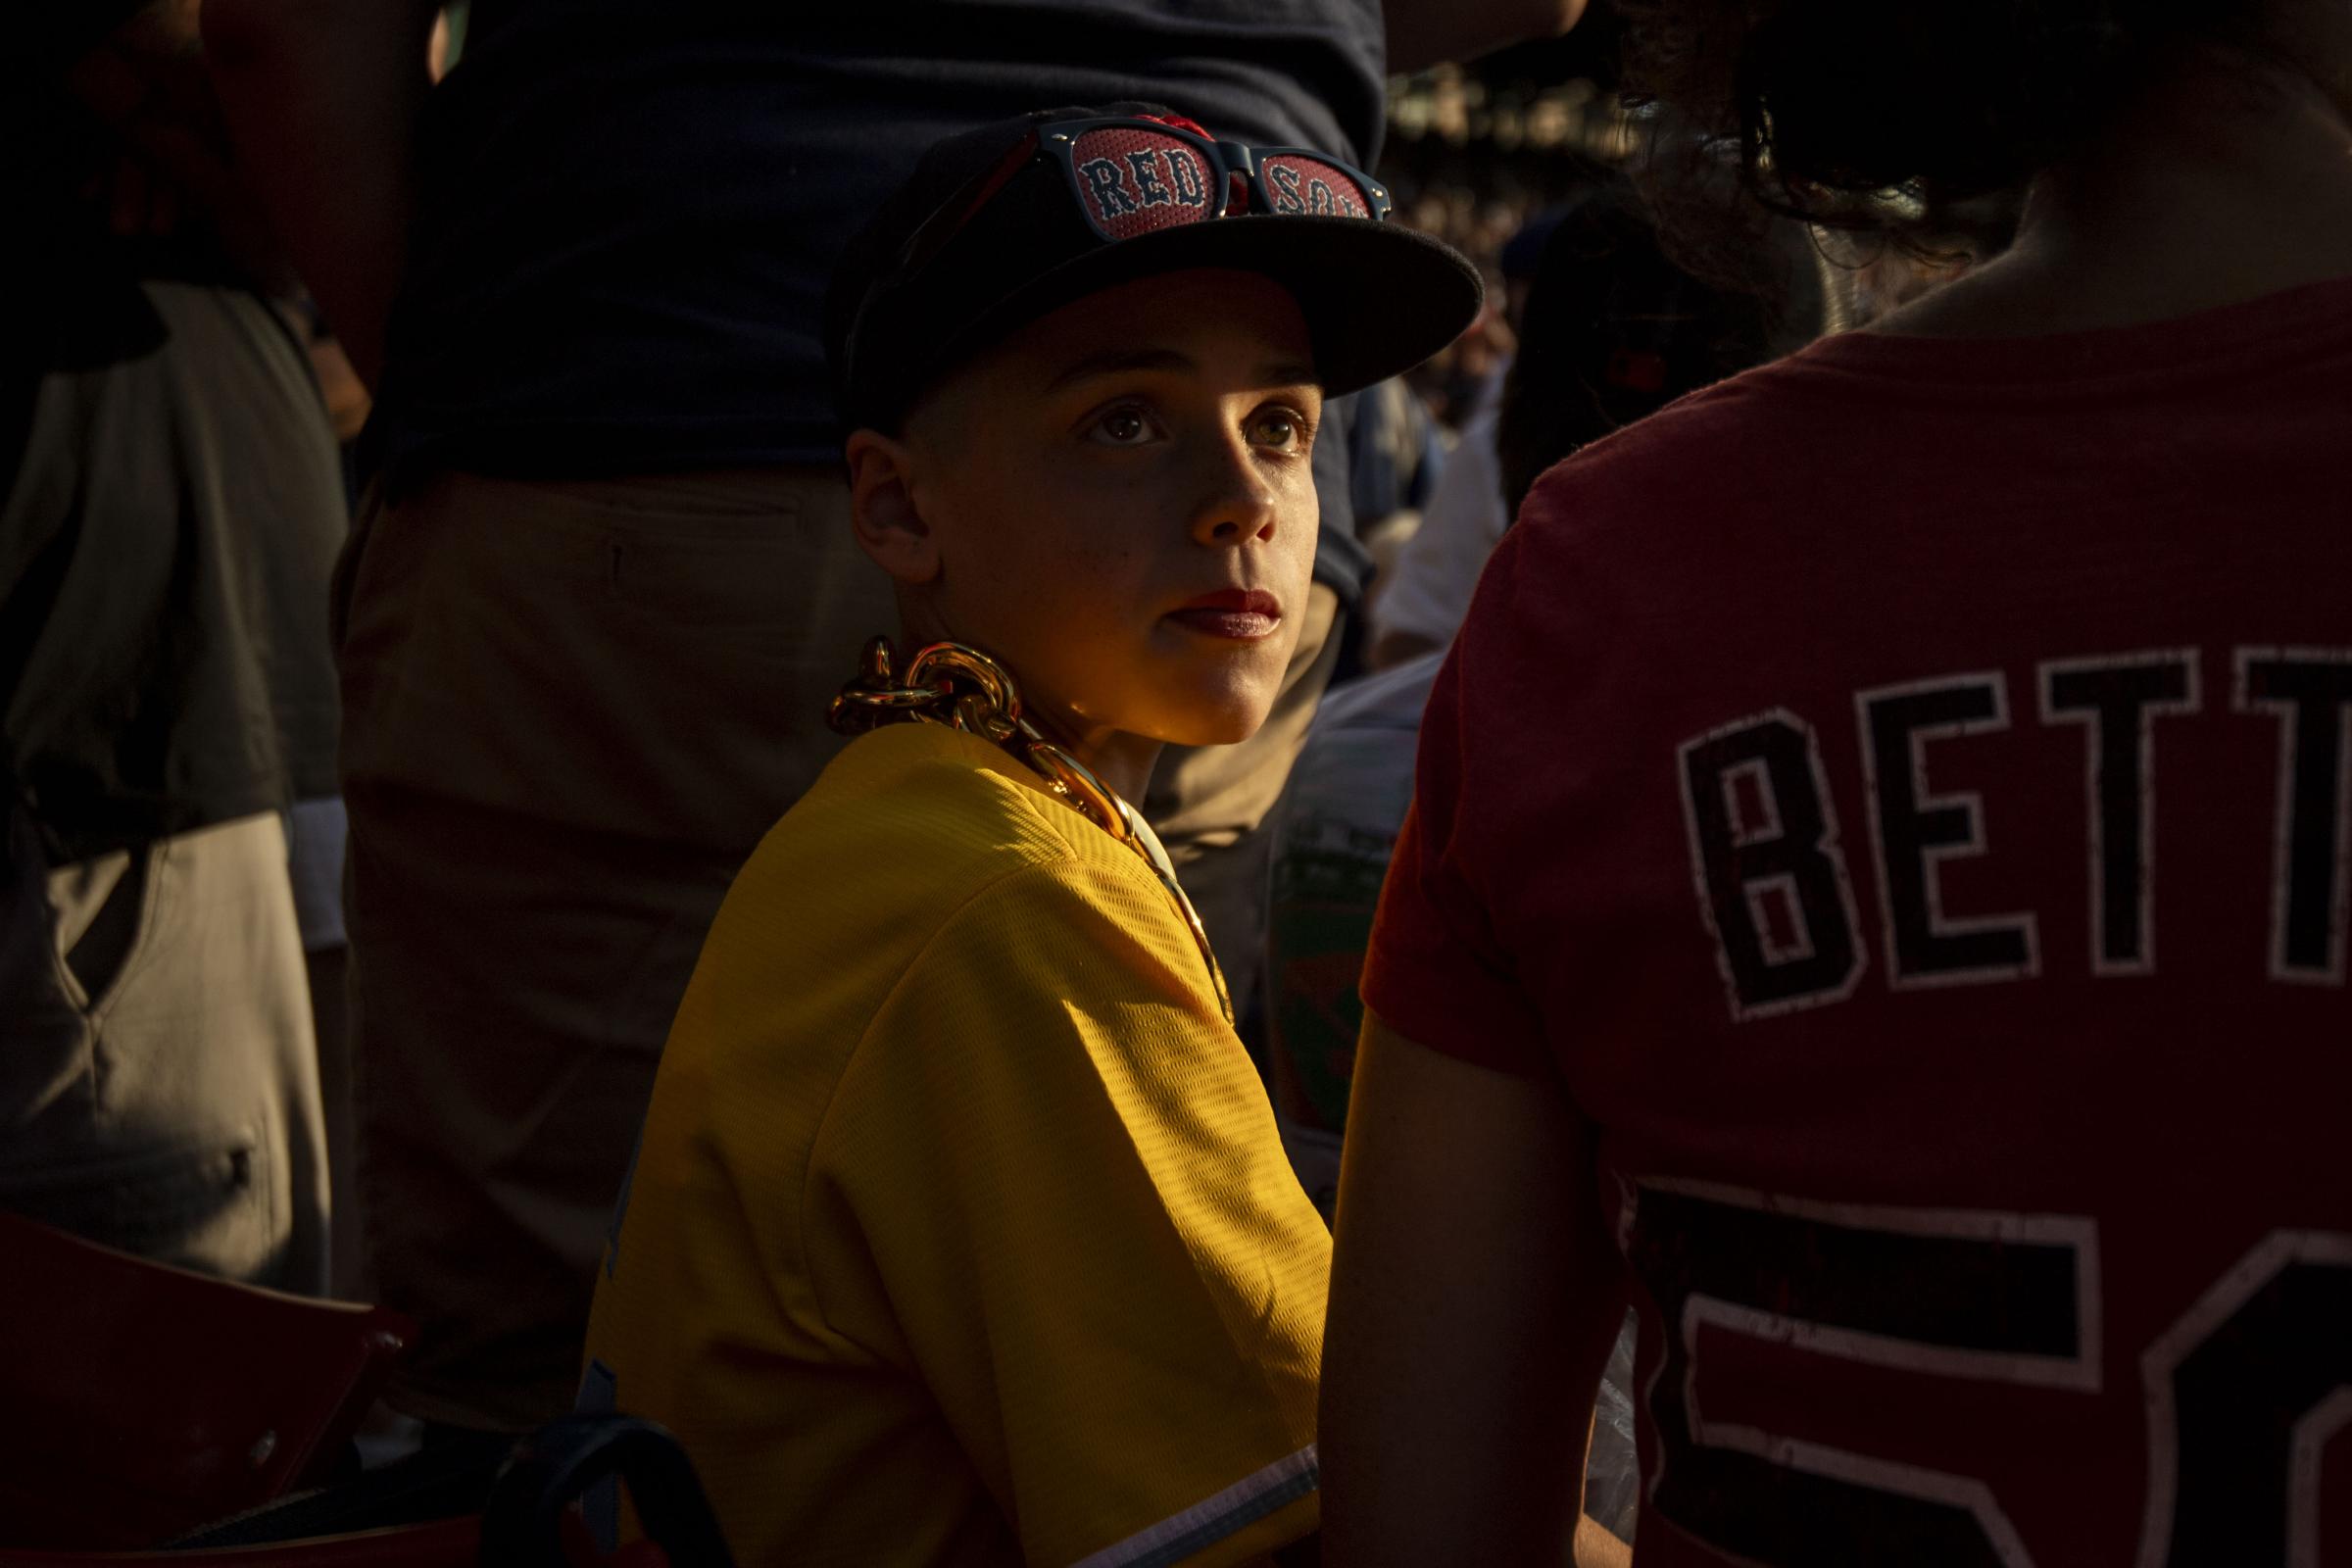 The 2023 Boston Red Sox  - August 26, 2023, Boston, MA: Fans look on during a game...